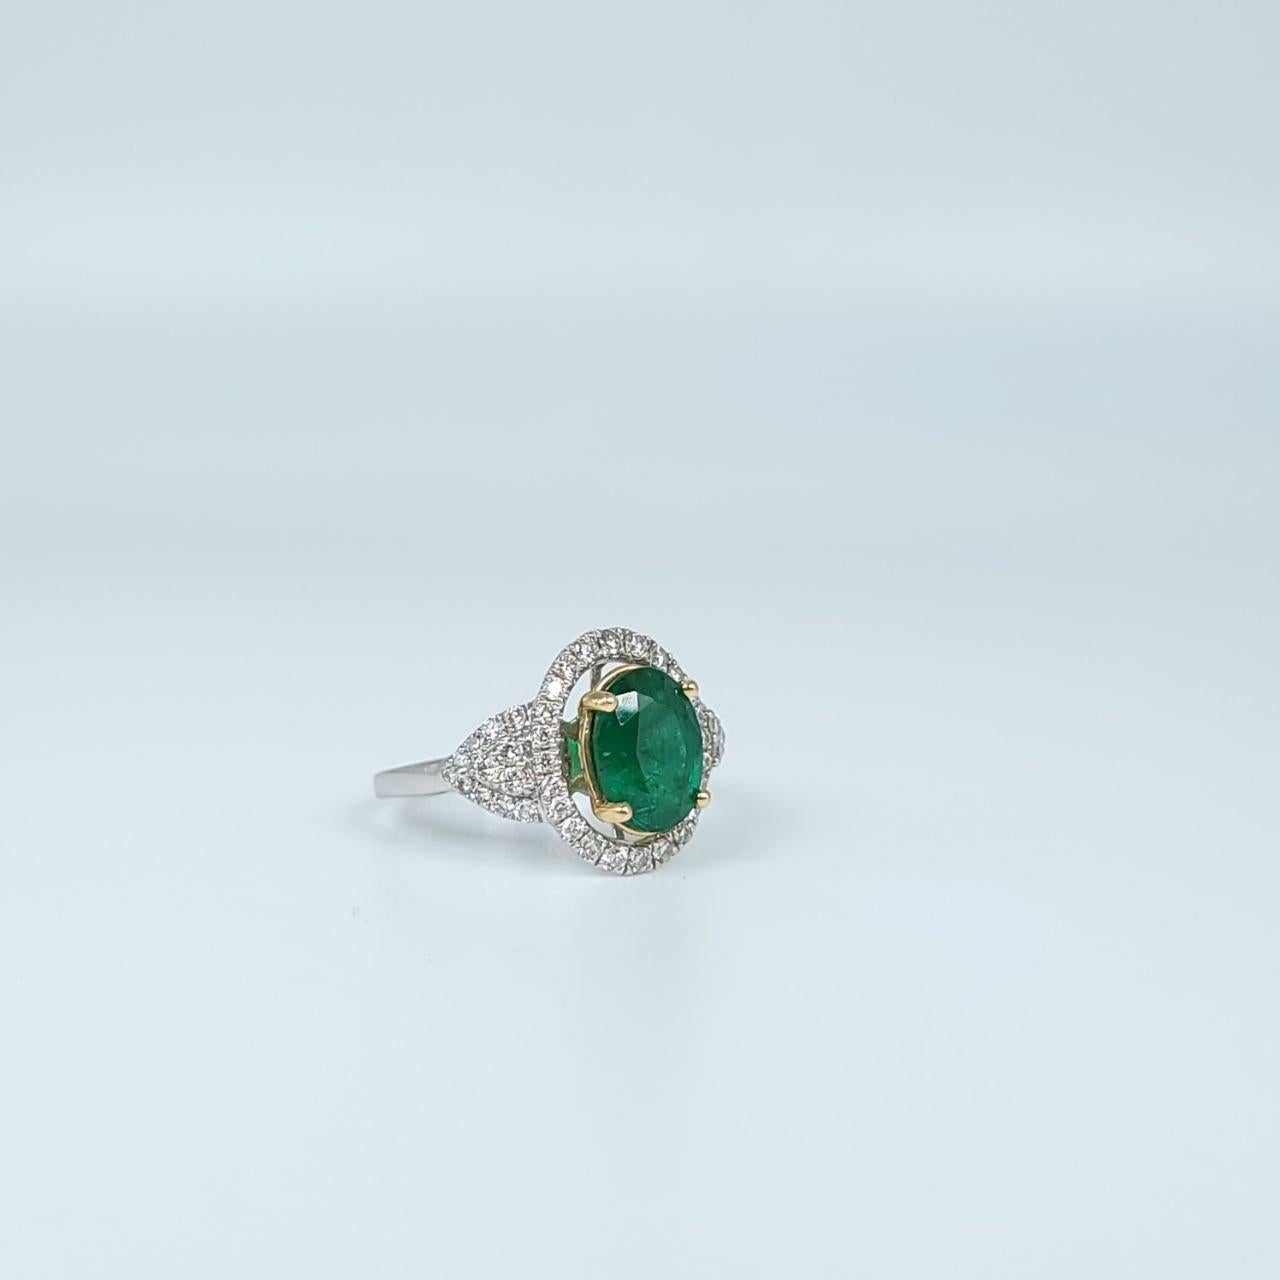 Emerald Diamond Ring Cocktail Diamond Ring with Large Brazilian Emerald For Sale 5